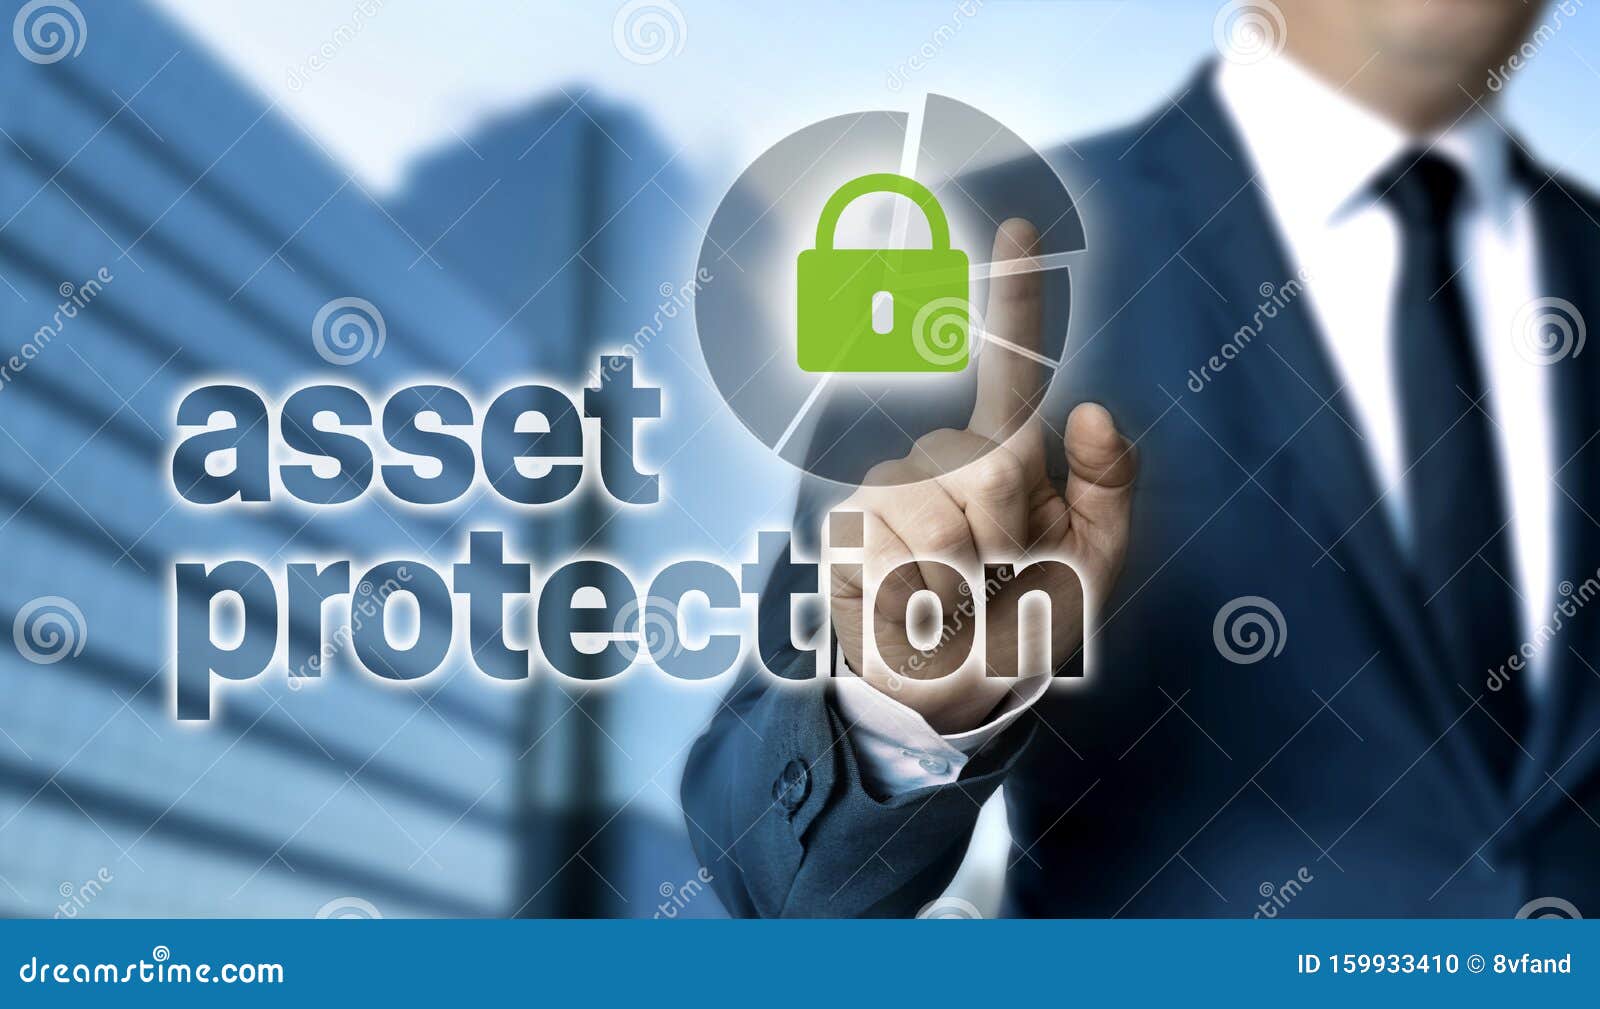 asset protection concept is shown by businessman